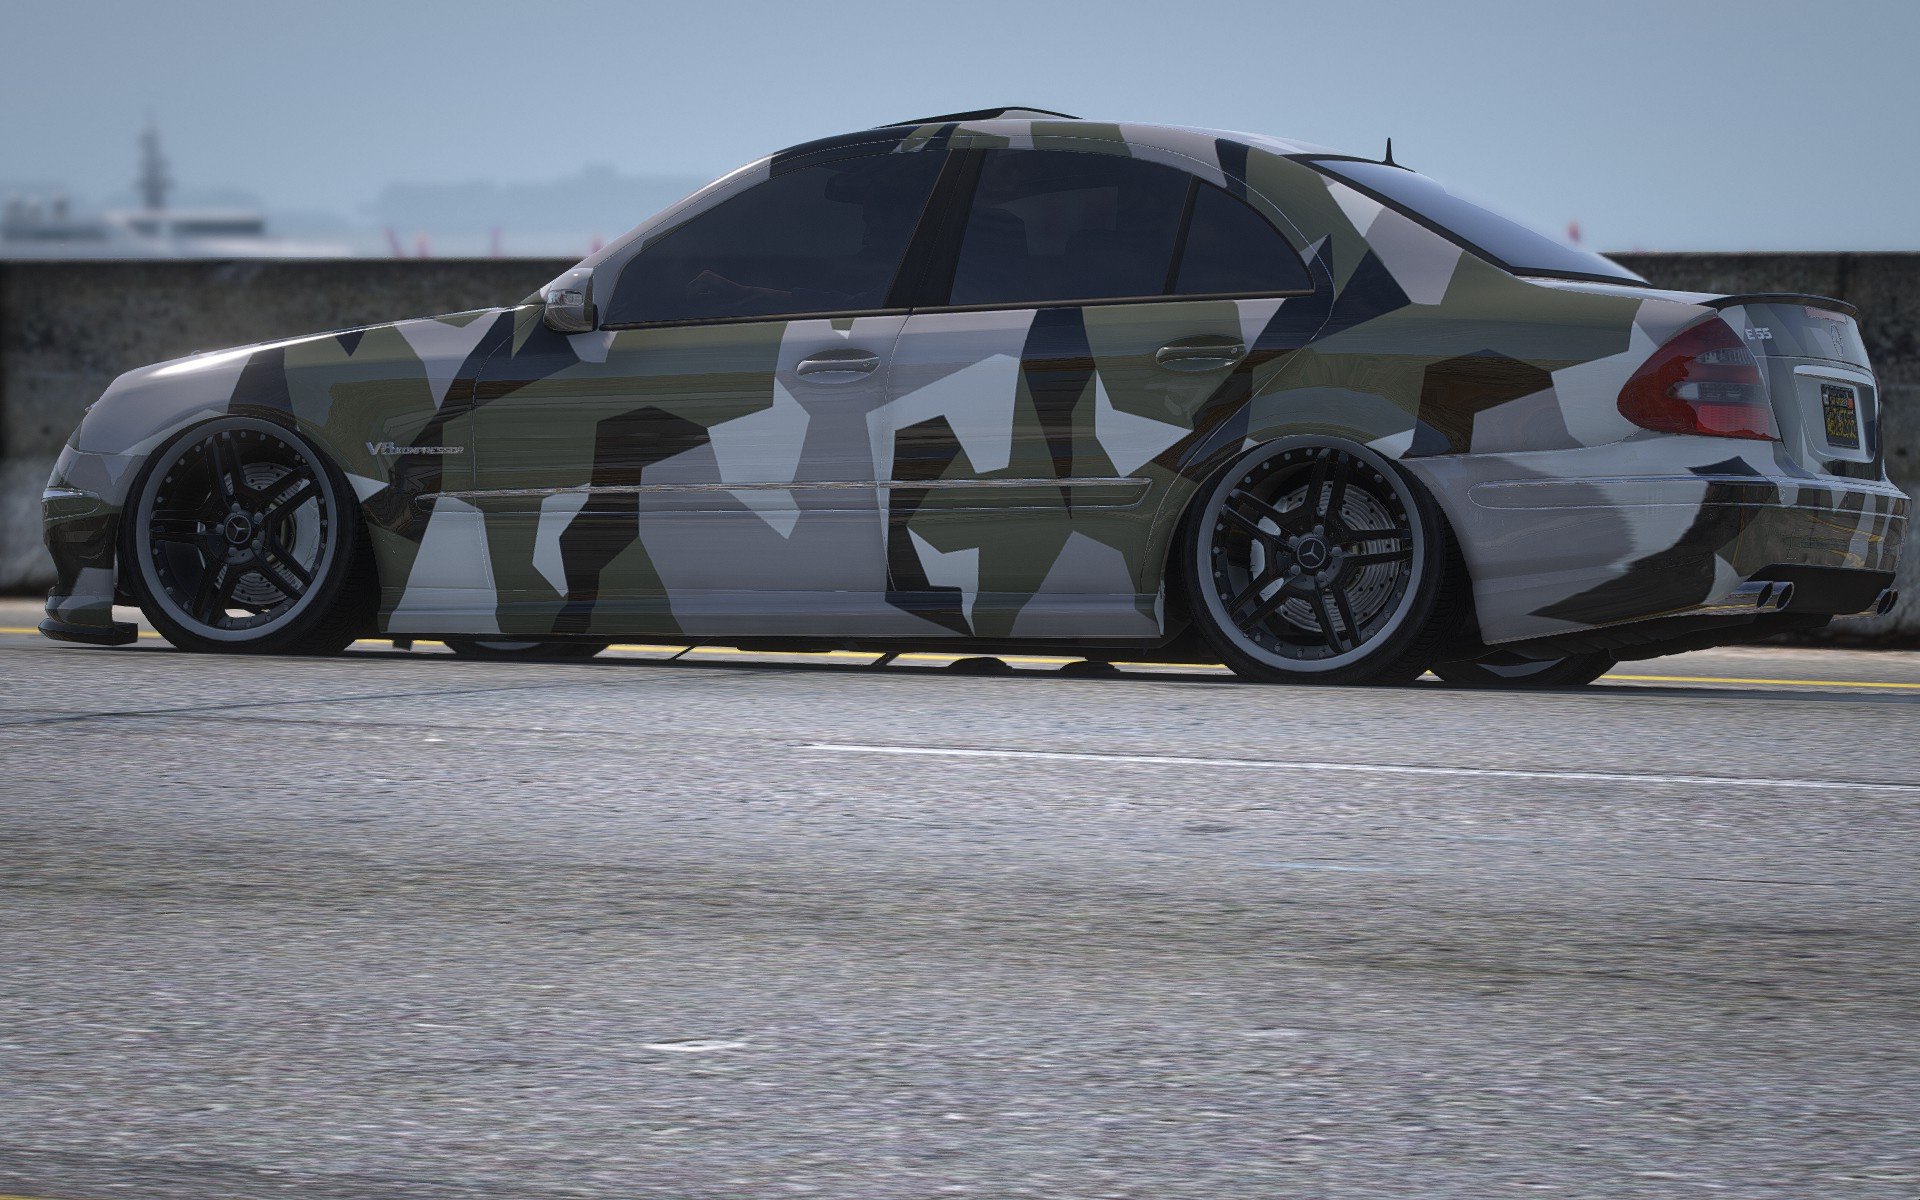 https://img.gta5-mods.com/q95/images/mercedes-benz-e55-amg-add-on-replace-tuning-realistic-sound-handling/7b49f7-20221220200533_1.jpg